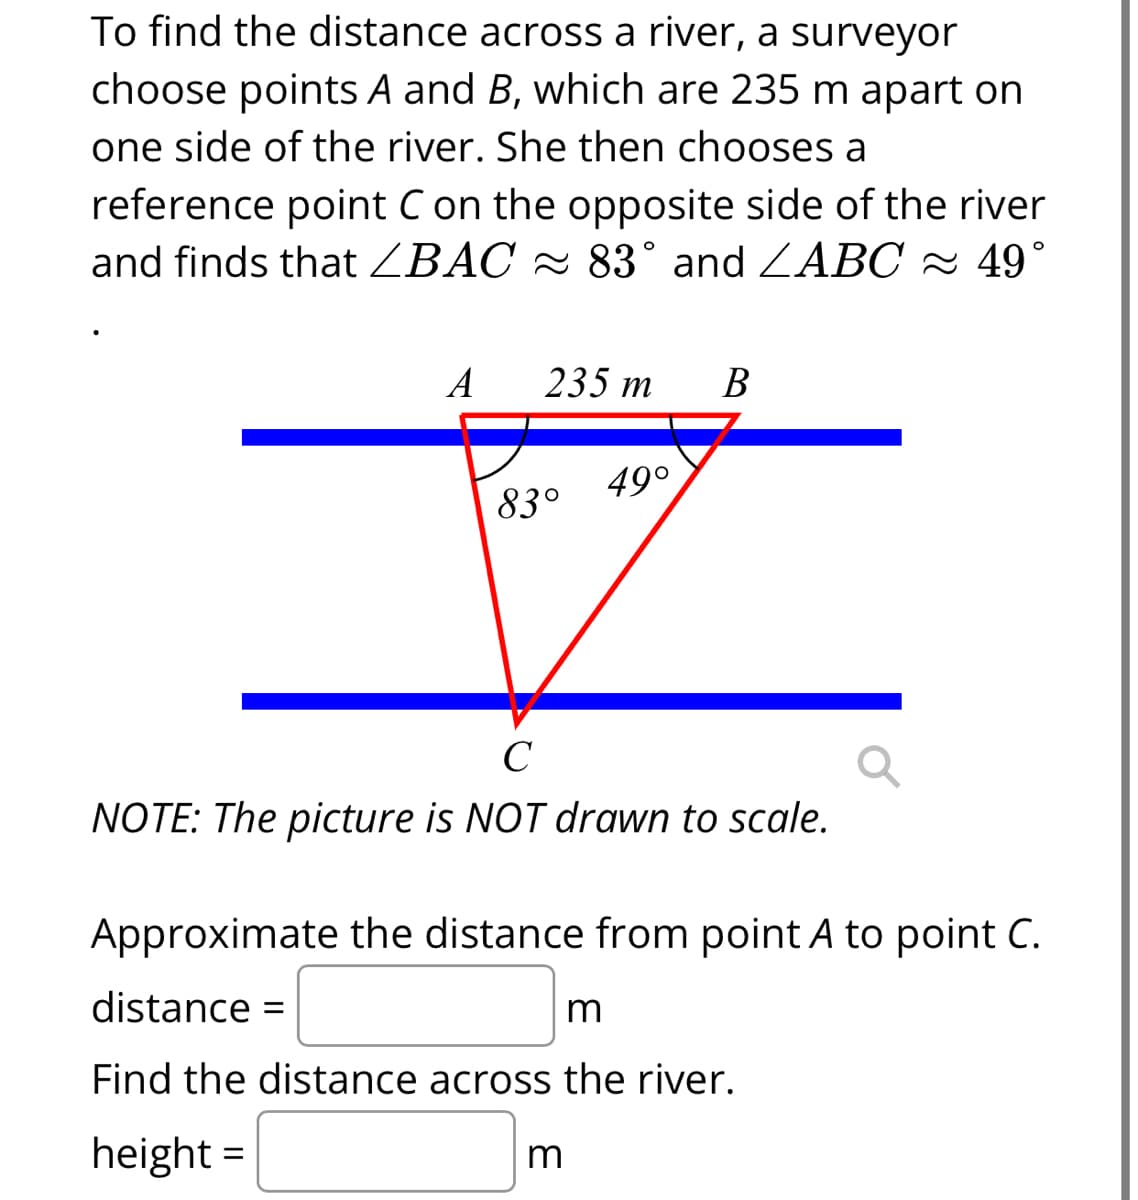 To find the distance across a river, a surveyor
choose points A and B, which are 235 m apart on
one side of the river. She then chooses a
reference point C on the opposite side of the river
and finds that ZBAC ≈ 83° and ZABC ≈ 49°
A 235 m B
83°
49°
C
NOTE: The picture is NOT drawn to scale.
Approximate the distance from point A to point C.
distance: =
m
Find the distance across the river.
height=
m